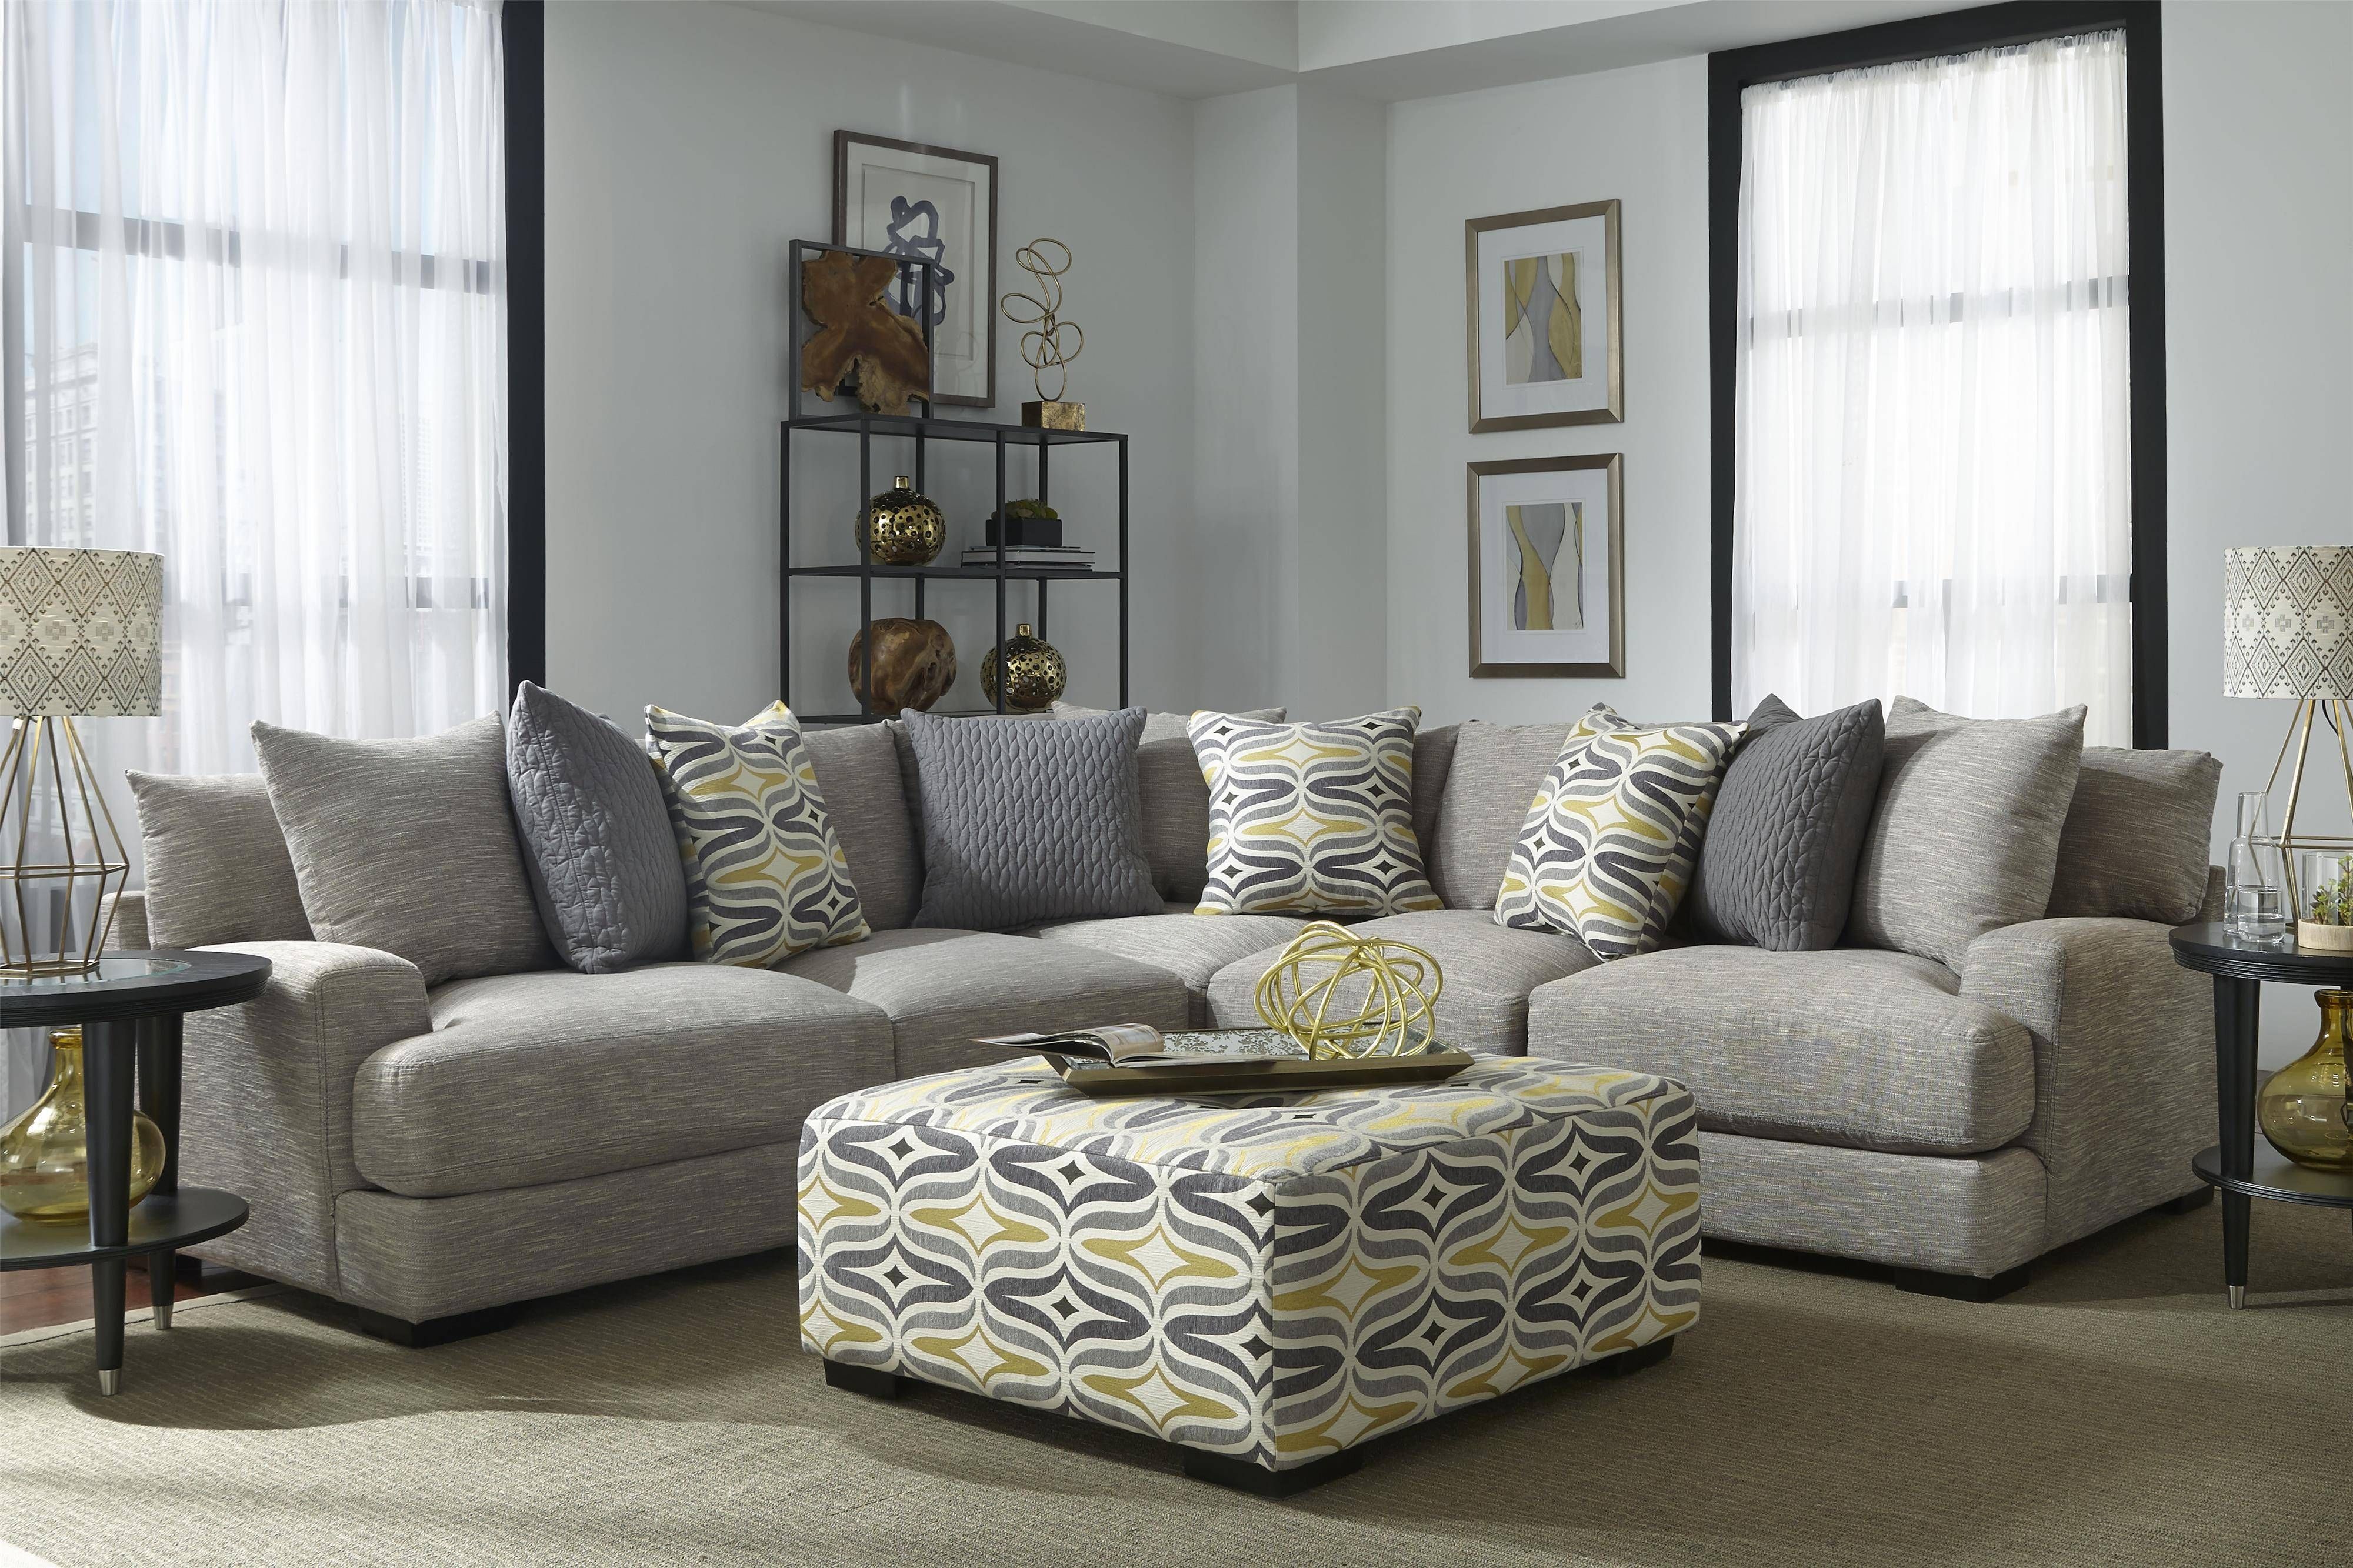 Sectional Sofa With 5 Seats – Bartonfranklin – Wilcox In Franklin Sectional Sofas (View 10 of 15)